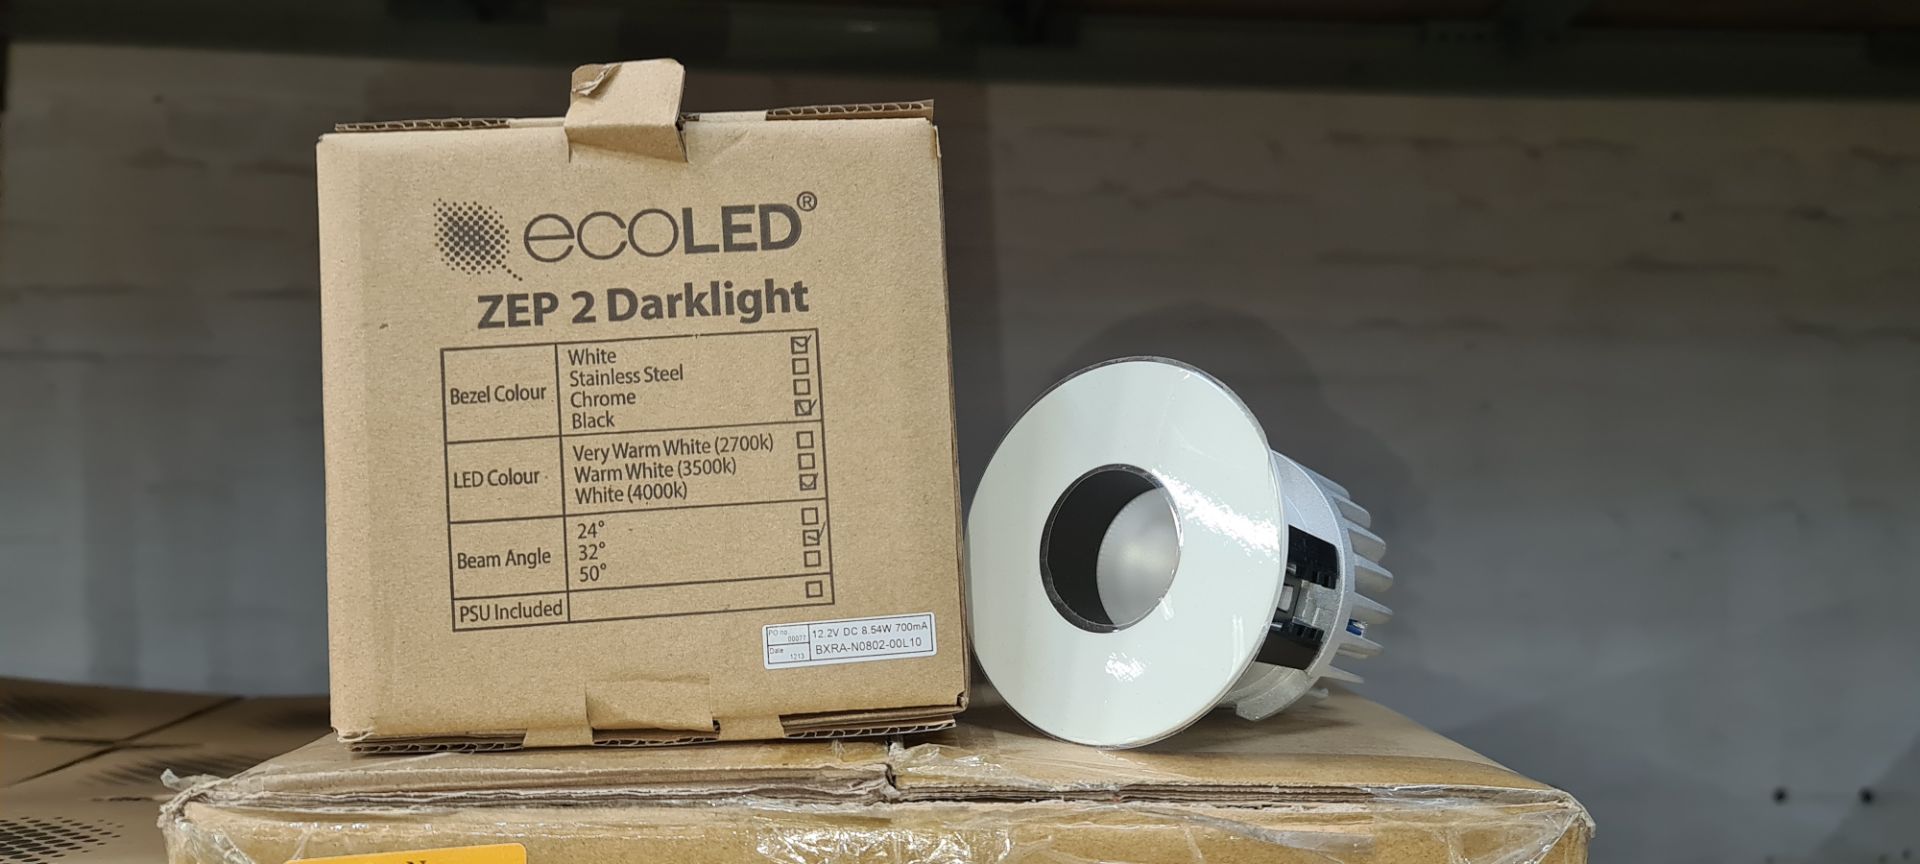 32 off EcoLED ZEP2 Darklight downlights in white with black inner trim. 4000K. Product code Z2D-W-40 - Image 13 of 14